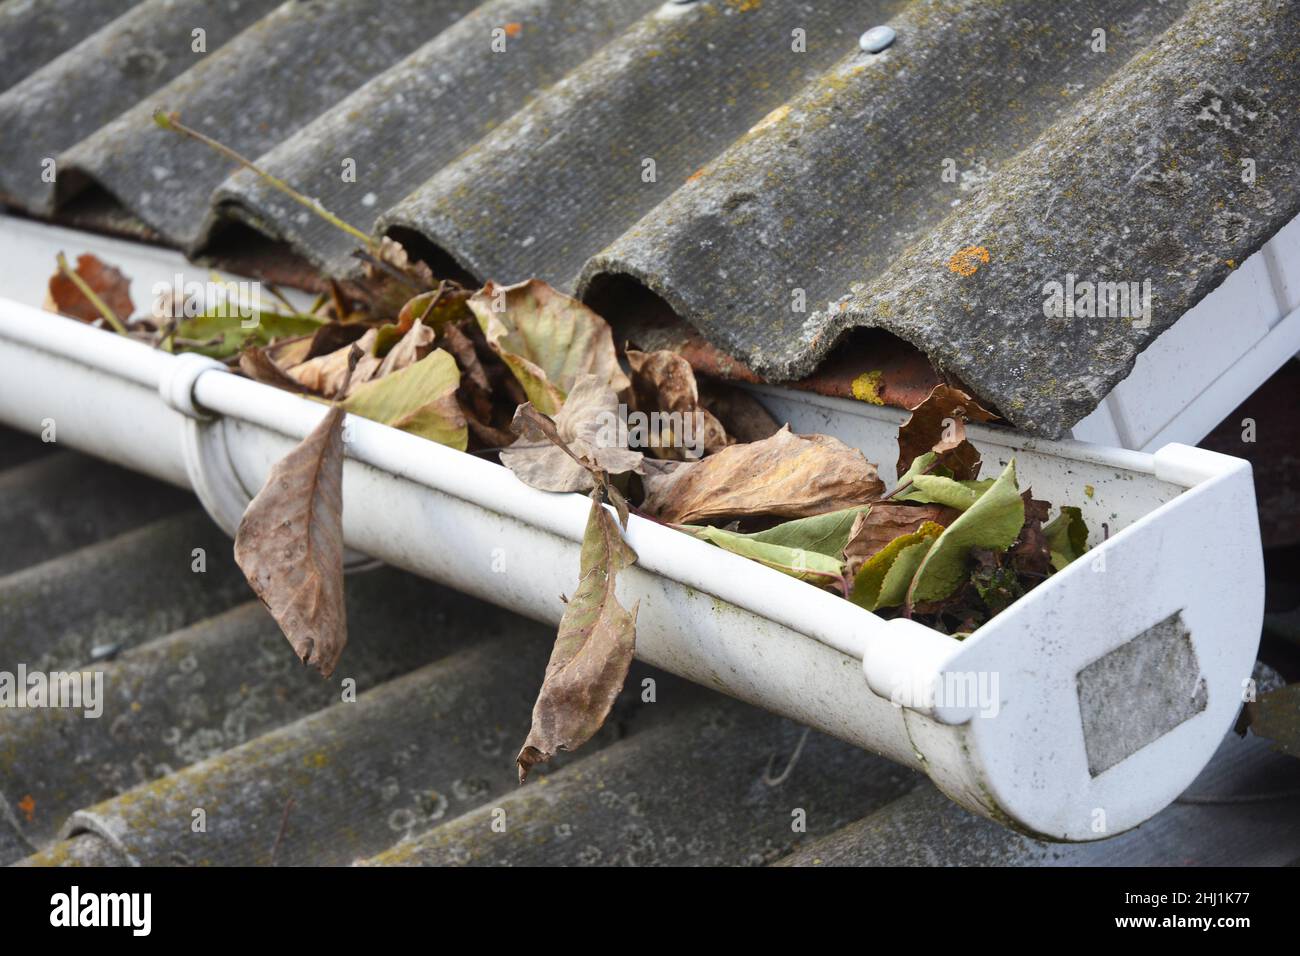 Rain Gutter Cleaning from Leaves in Autumn. Clean Your Gutters Before They Clean Out Your Wallet. Rain Gutter Cleaning. Stock Photo